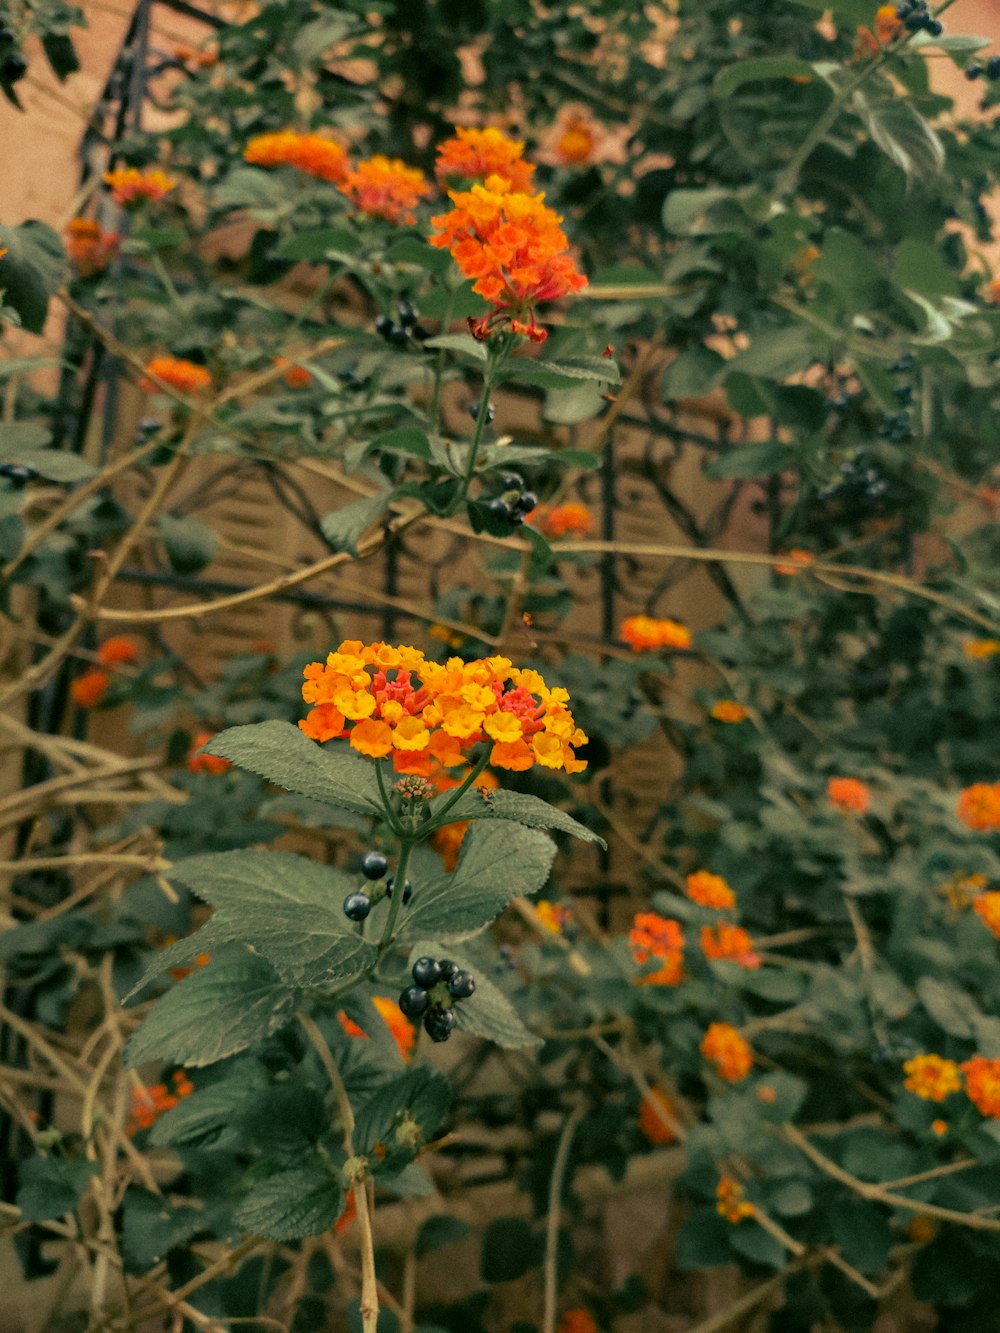 a plant with orange and yellow flowers in a garden